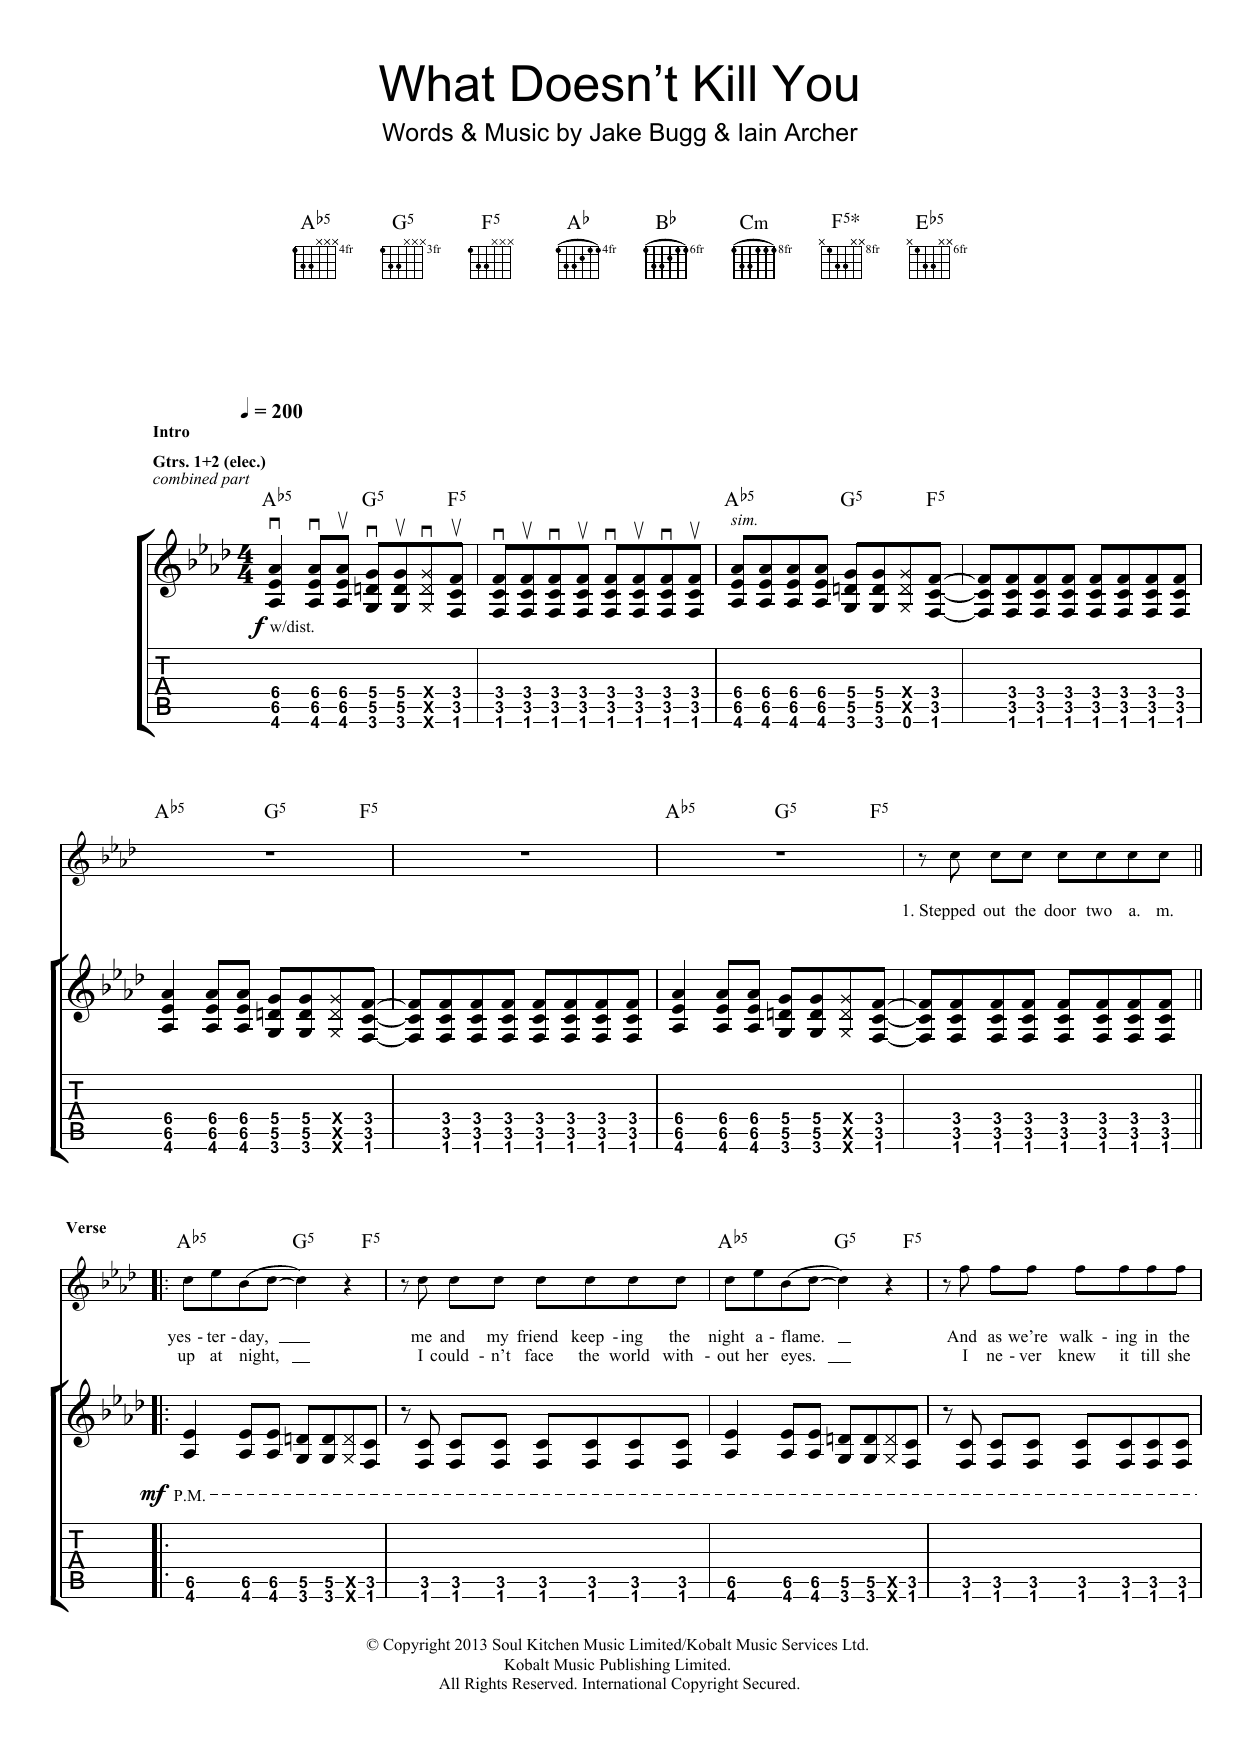 Download Jake Bugg What Doesn't Kill You Sheet Music